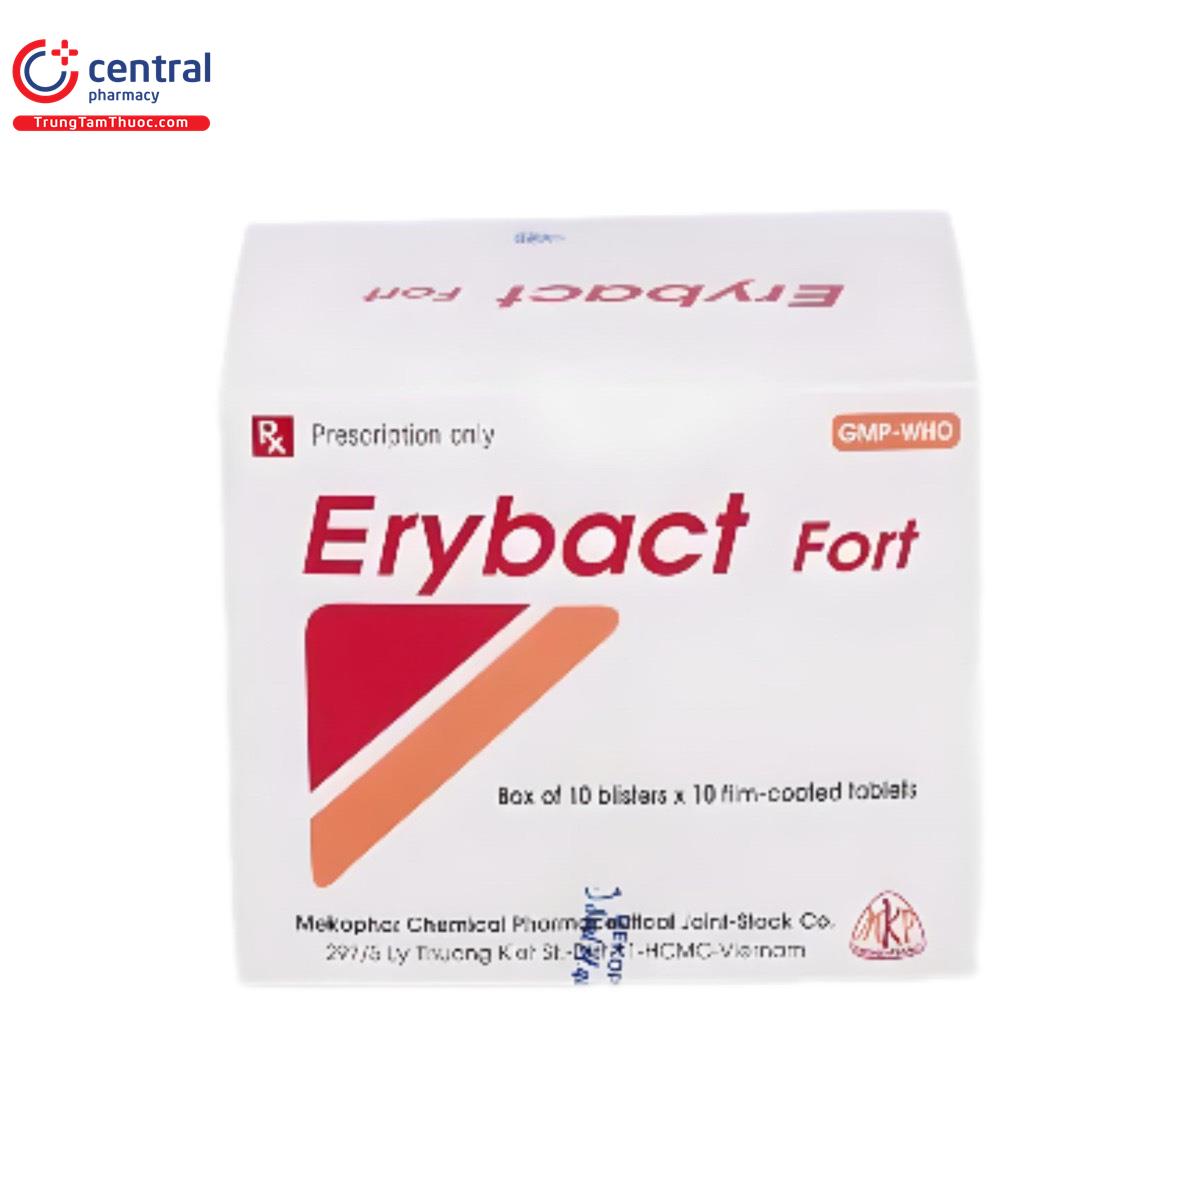 erybact fort 4 M4042